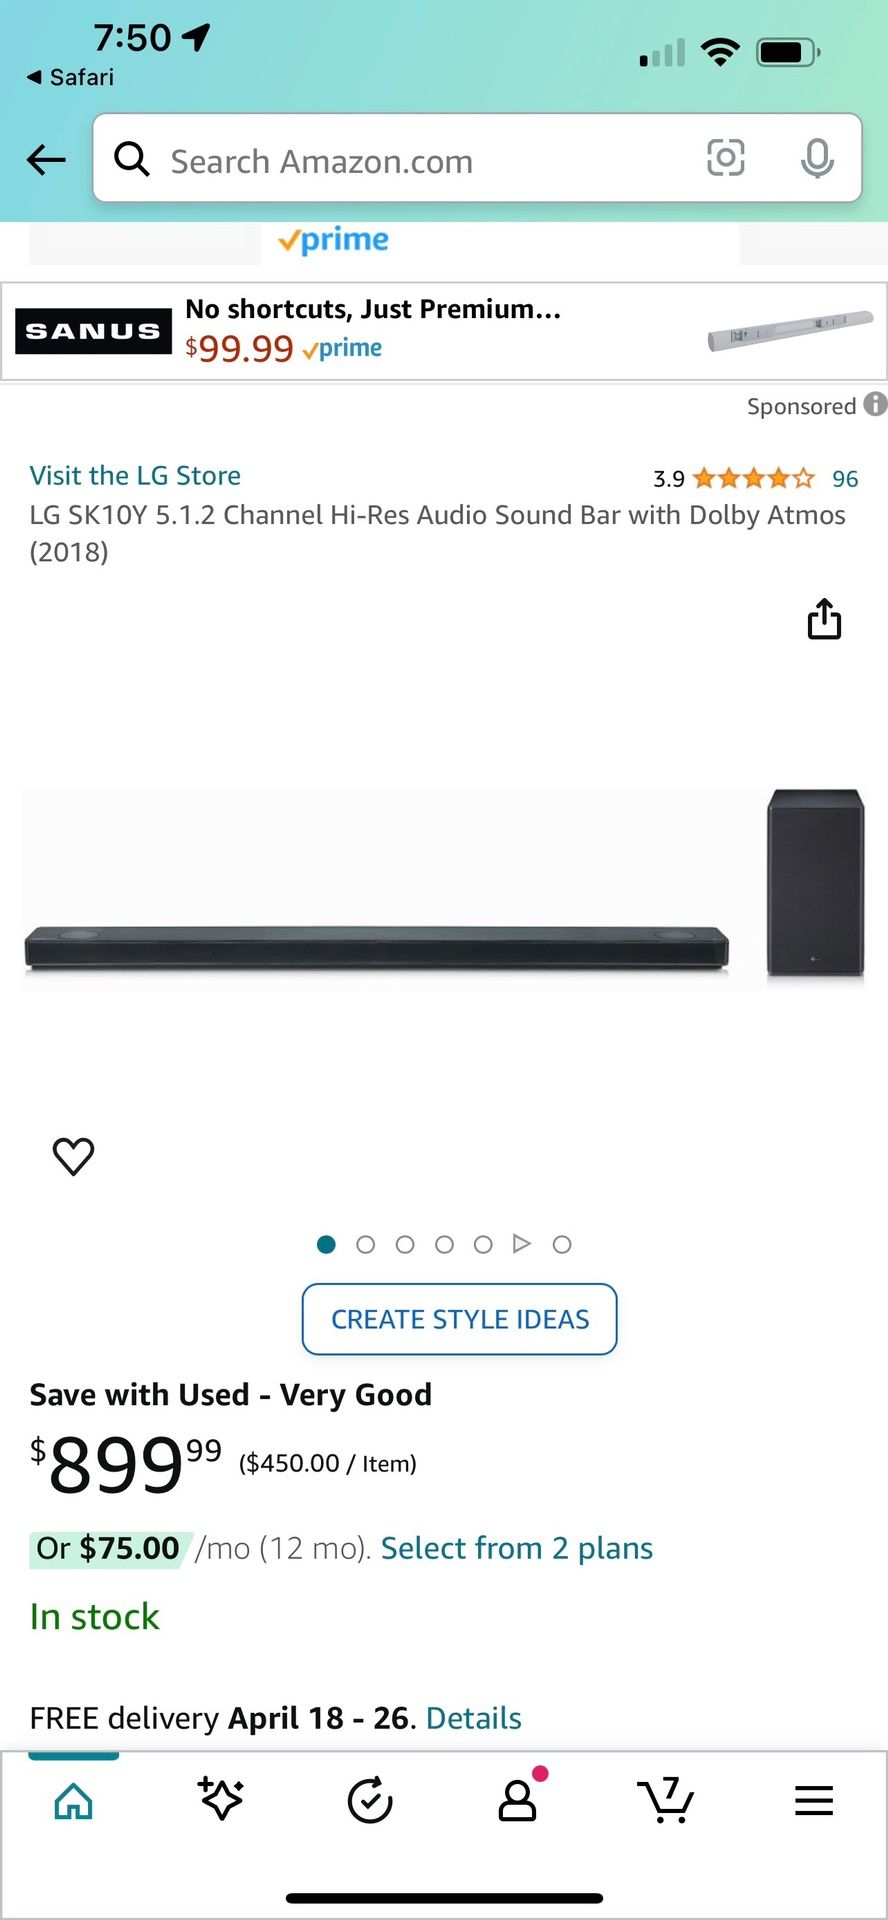 LG SK10Y 5.1.2 Channel Hi-Res Audio Sound Bar with Dolby Atmos